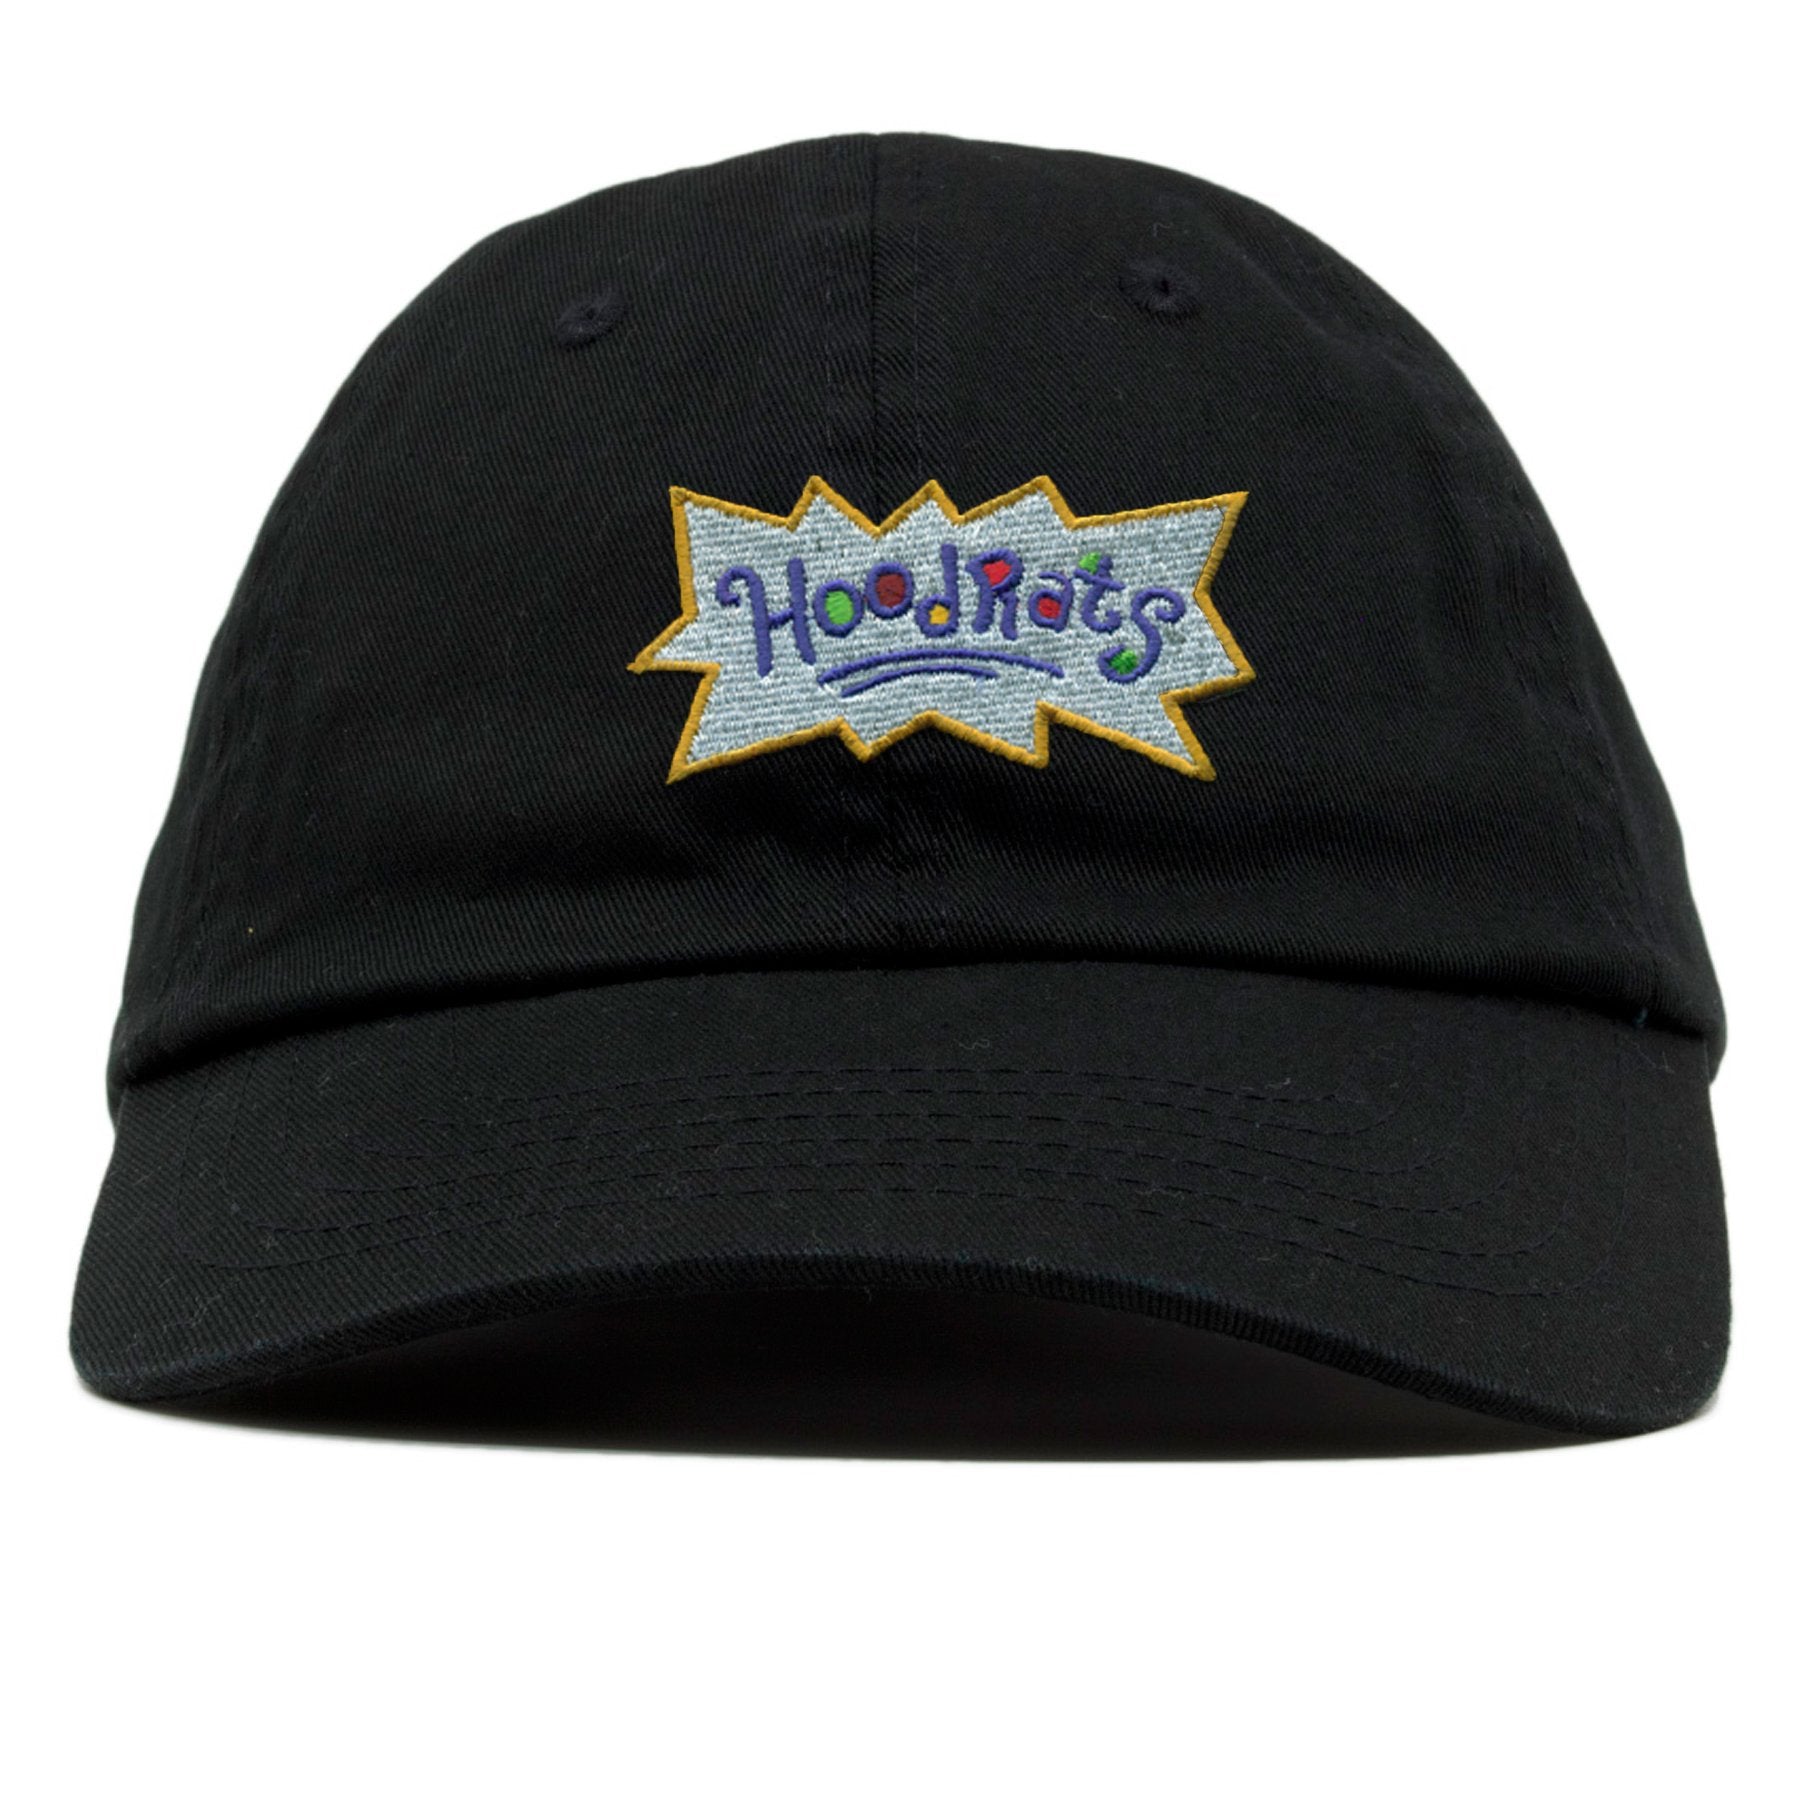 on the front of the hood rats dad hat, the rugrats inspired hoodrats logo is embroidered